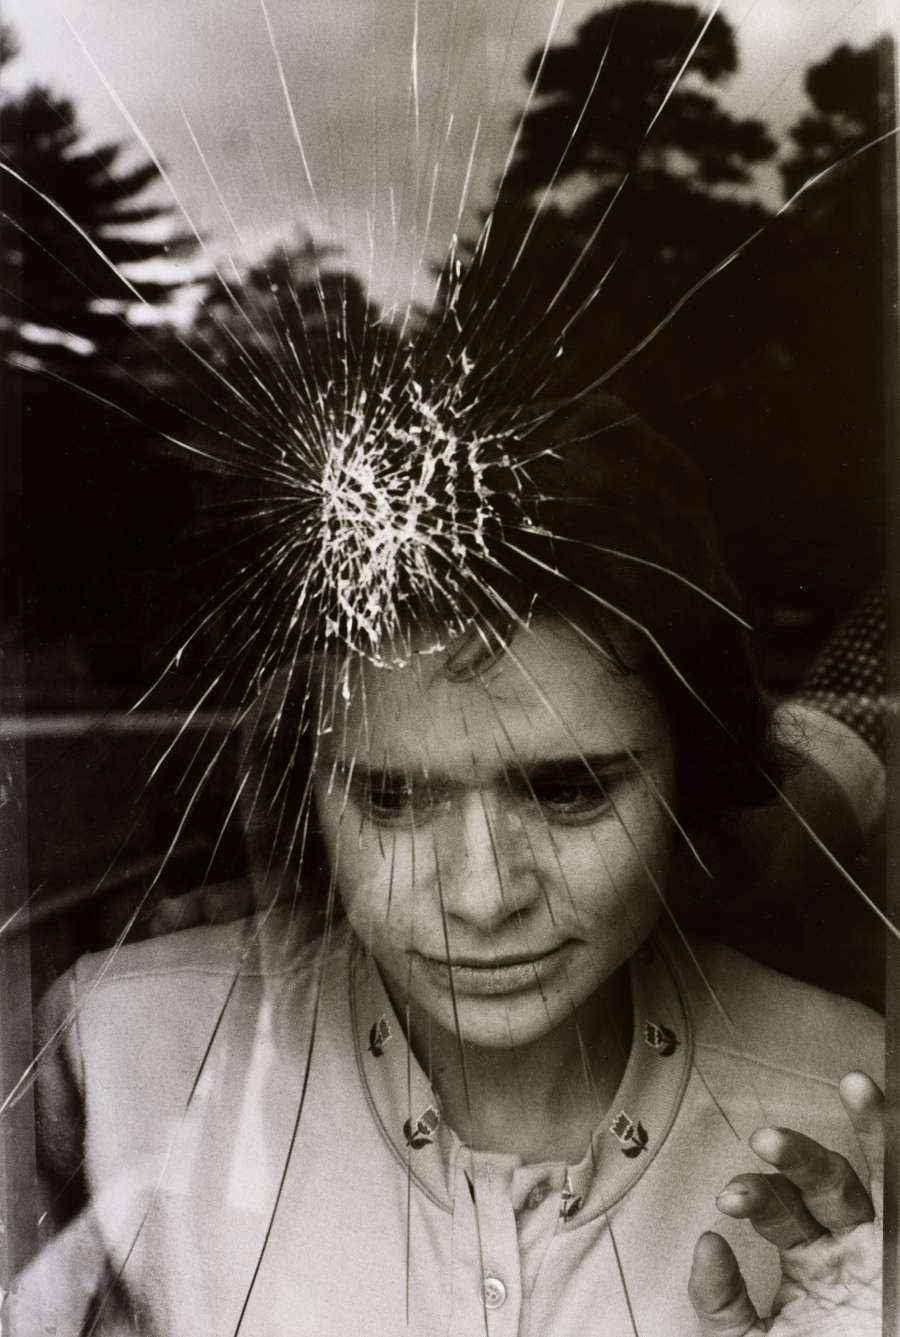 Grayscale photograph of a girl peering out of a cracked window, fingers pressed against the glass and gaze oriented downward. Her face is partially obscured by cracks in the glass.